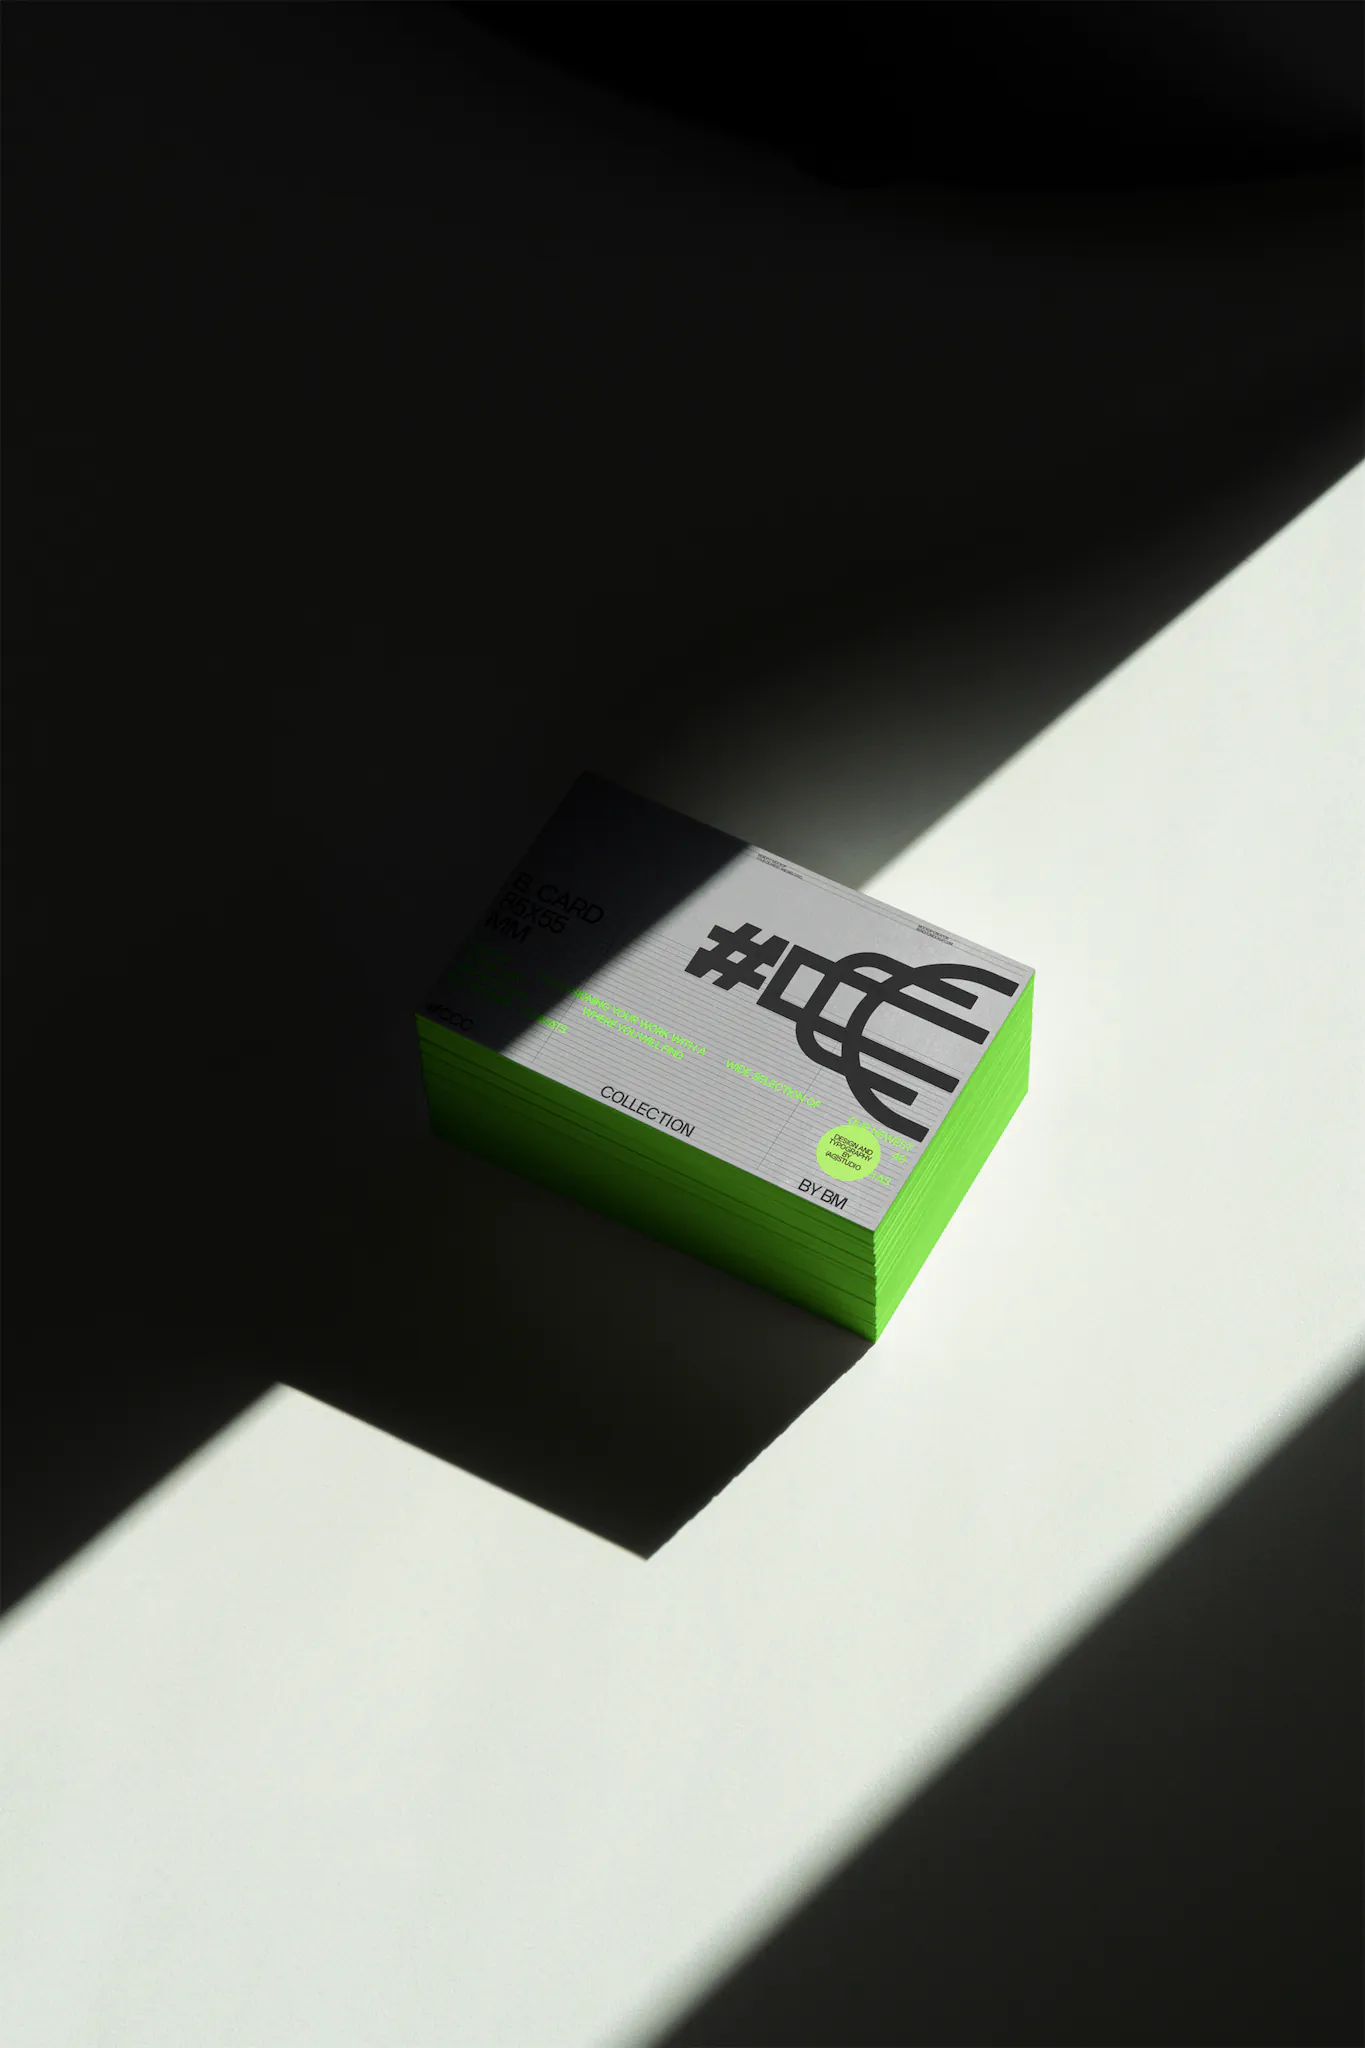 Business card format mockup on top of a white table in a real lights and shadows scene.